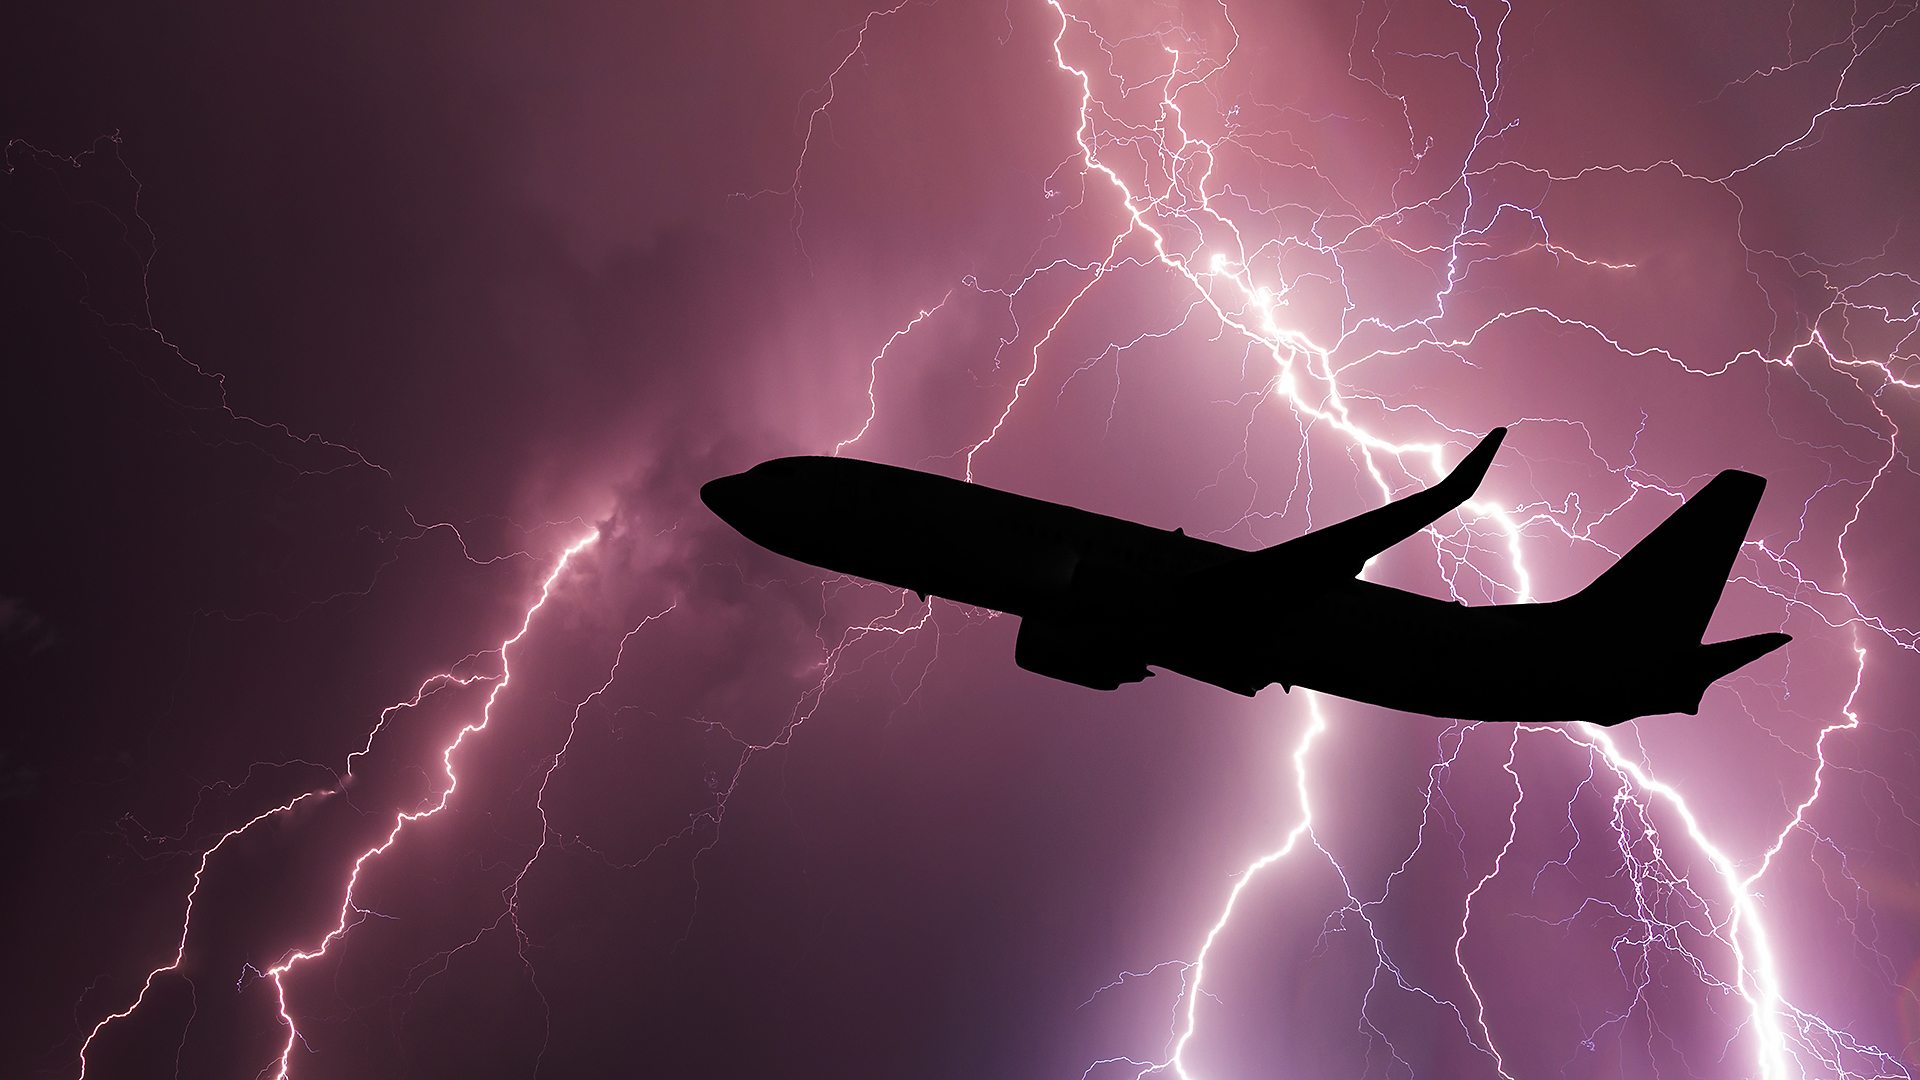 Why are we scared of flying on planes?